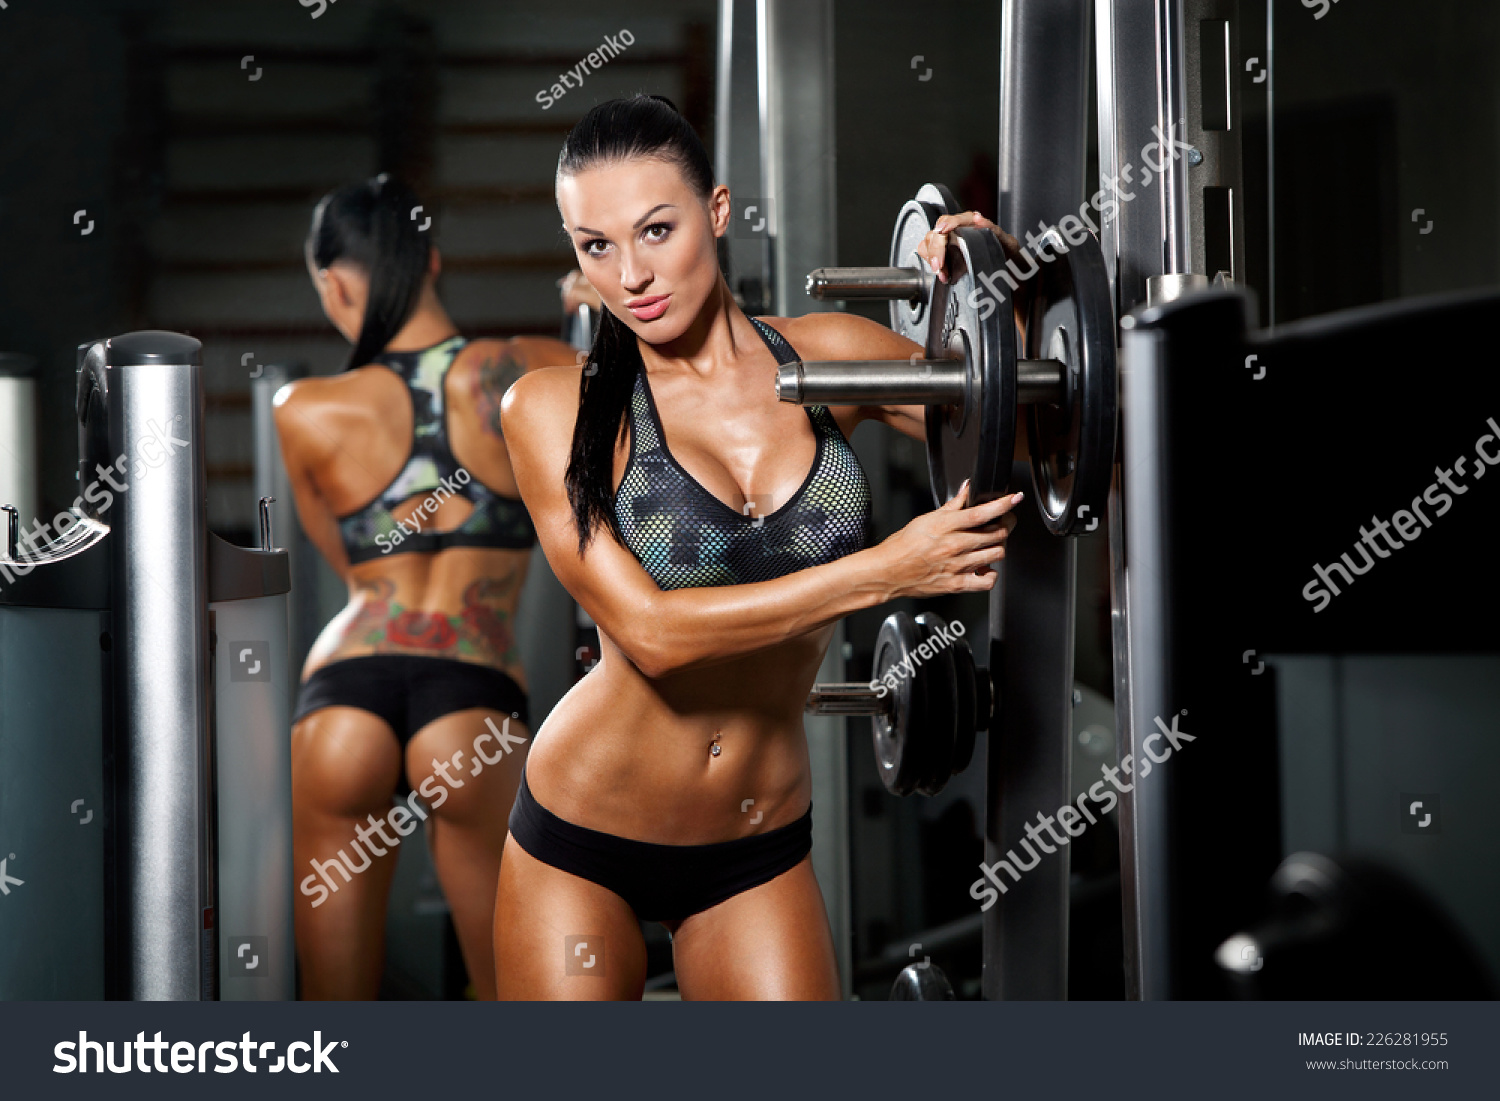 Black Sexy In Gym Pics Free Site 27